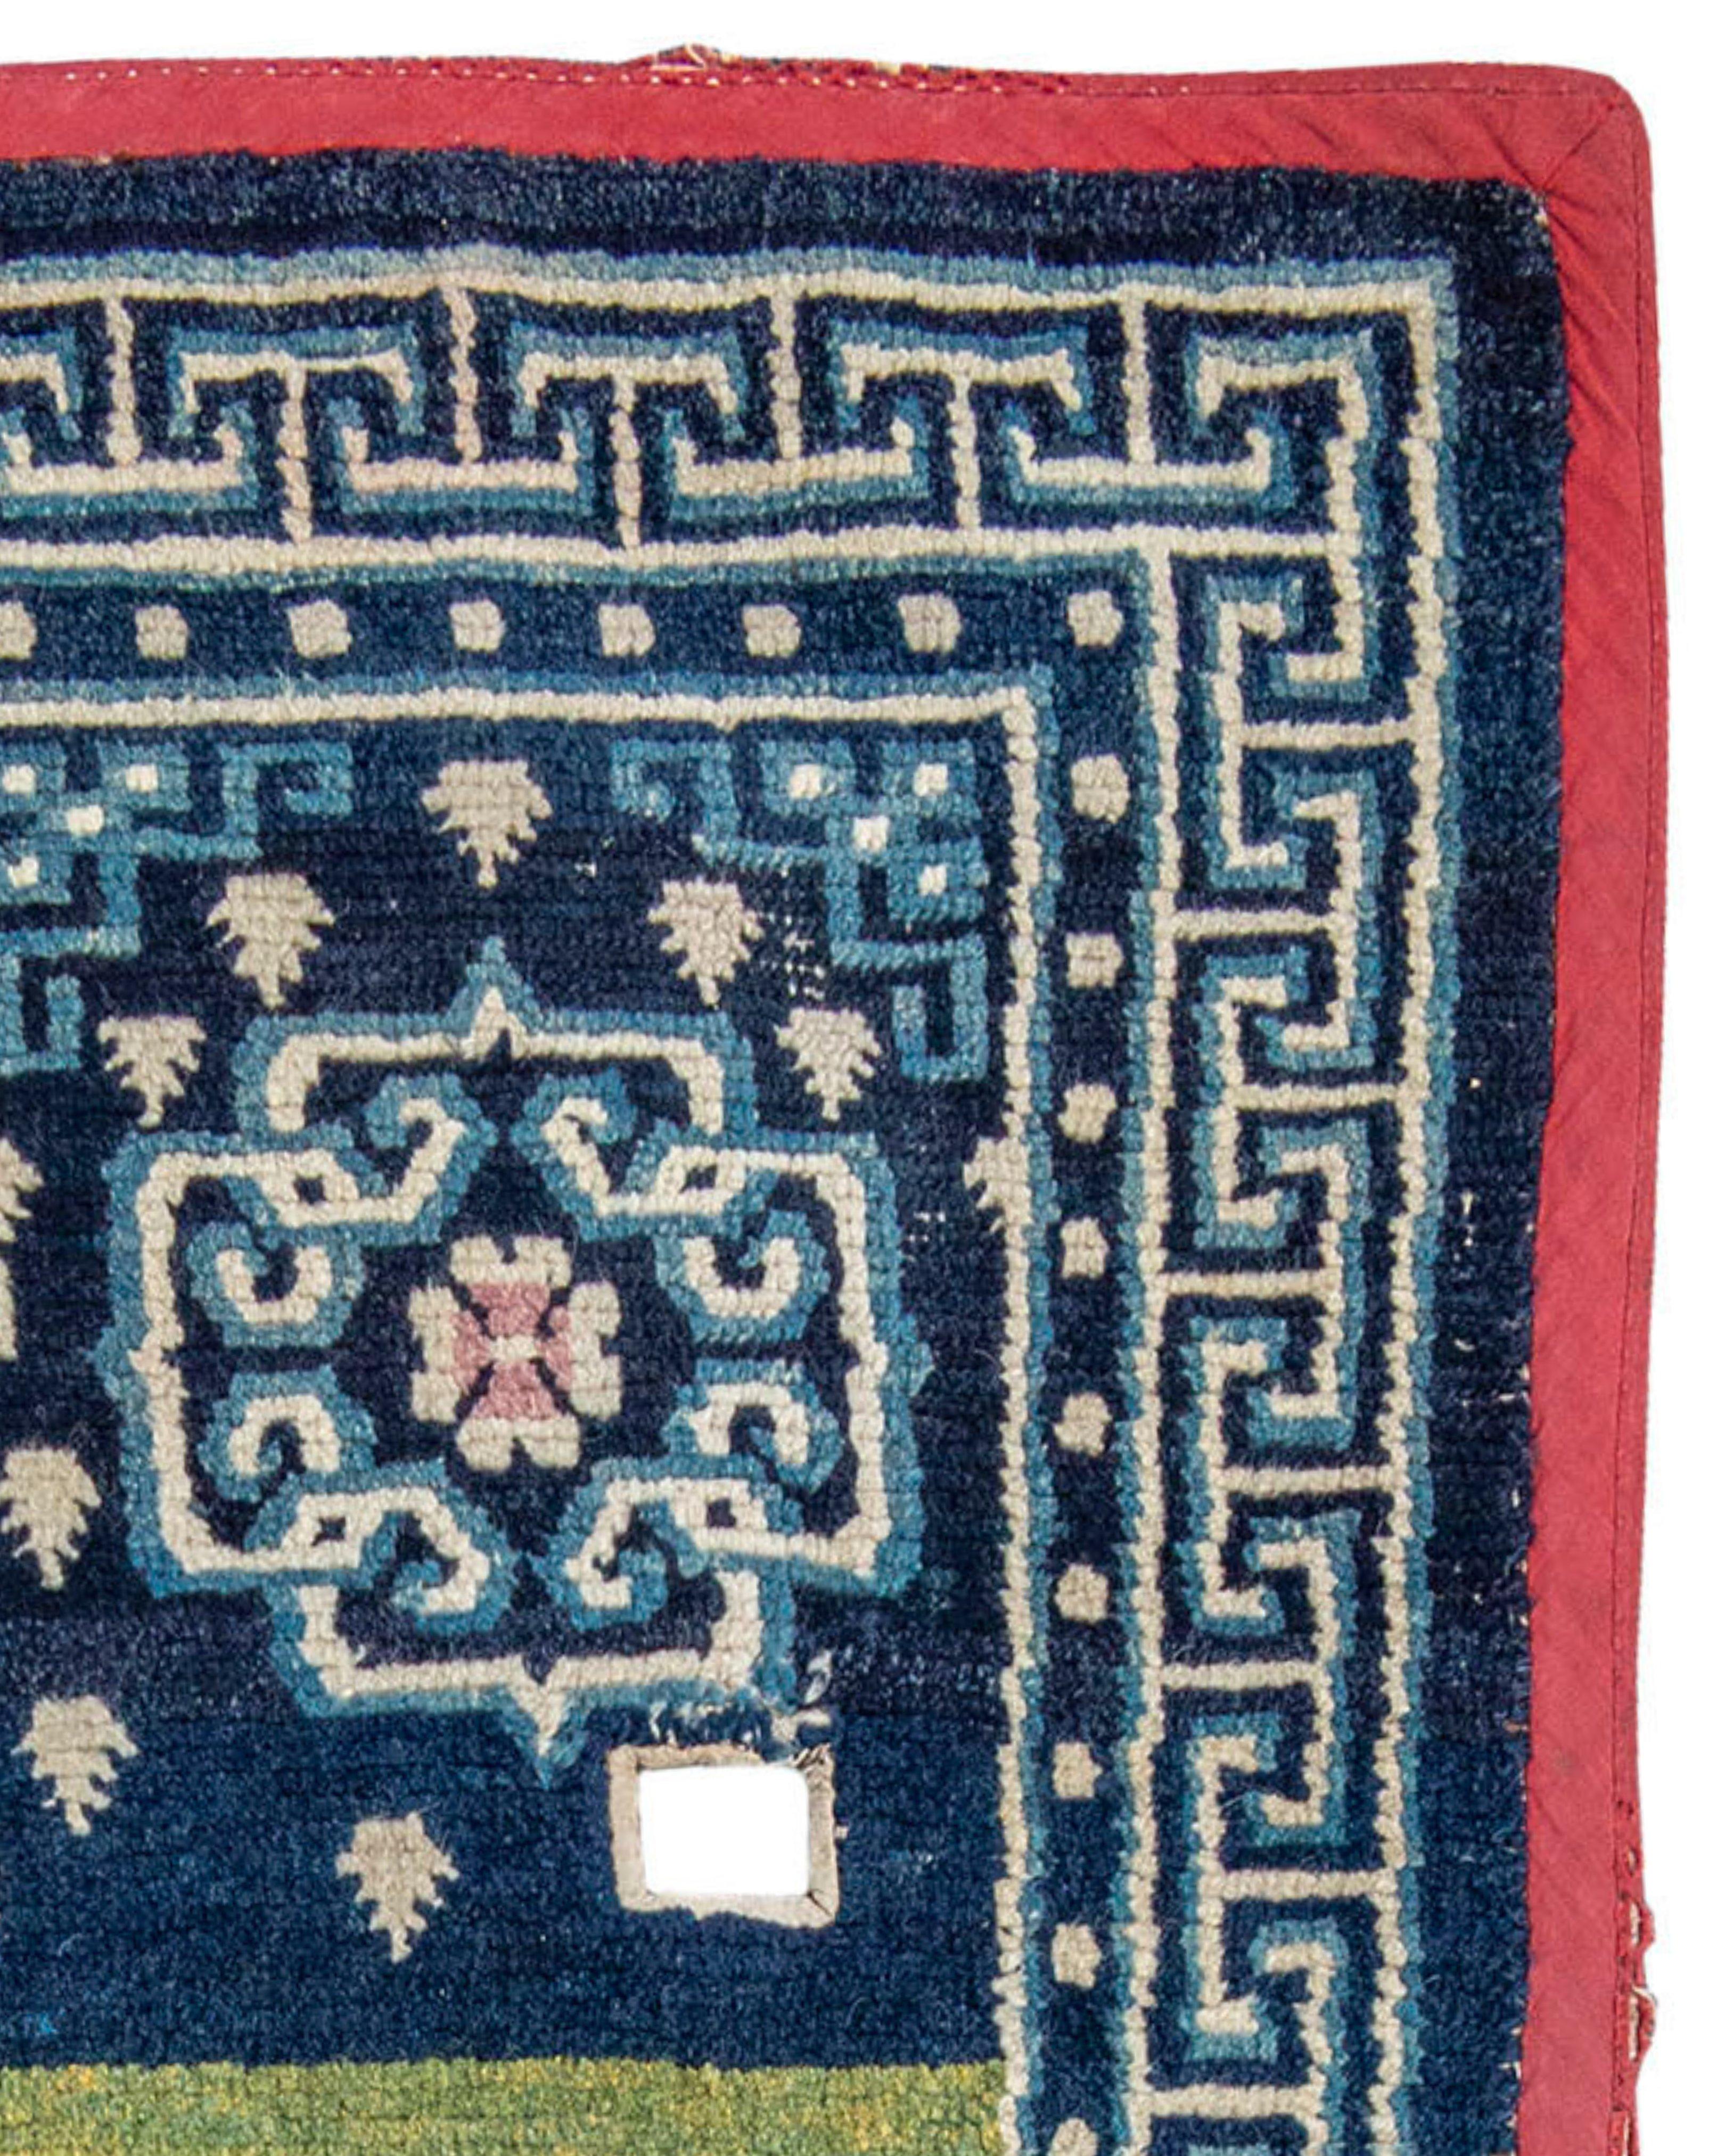 Antique Tibetan Saddle Rug/Blanket, Late 19th Century

Additional Information:
Dimensions: 4'0